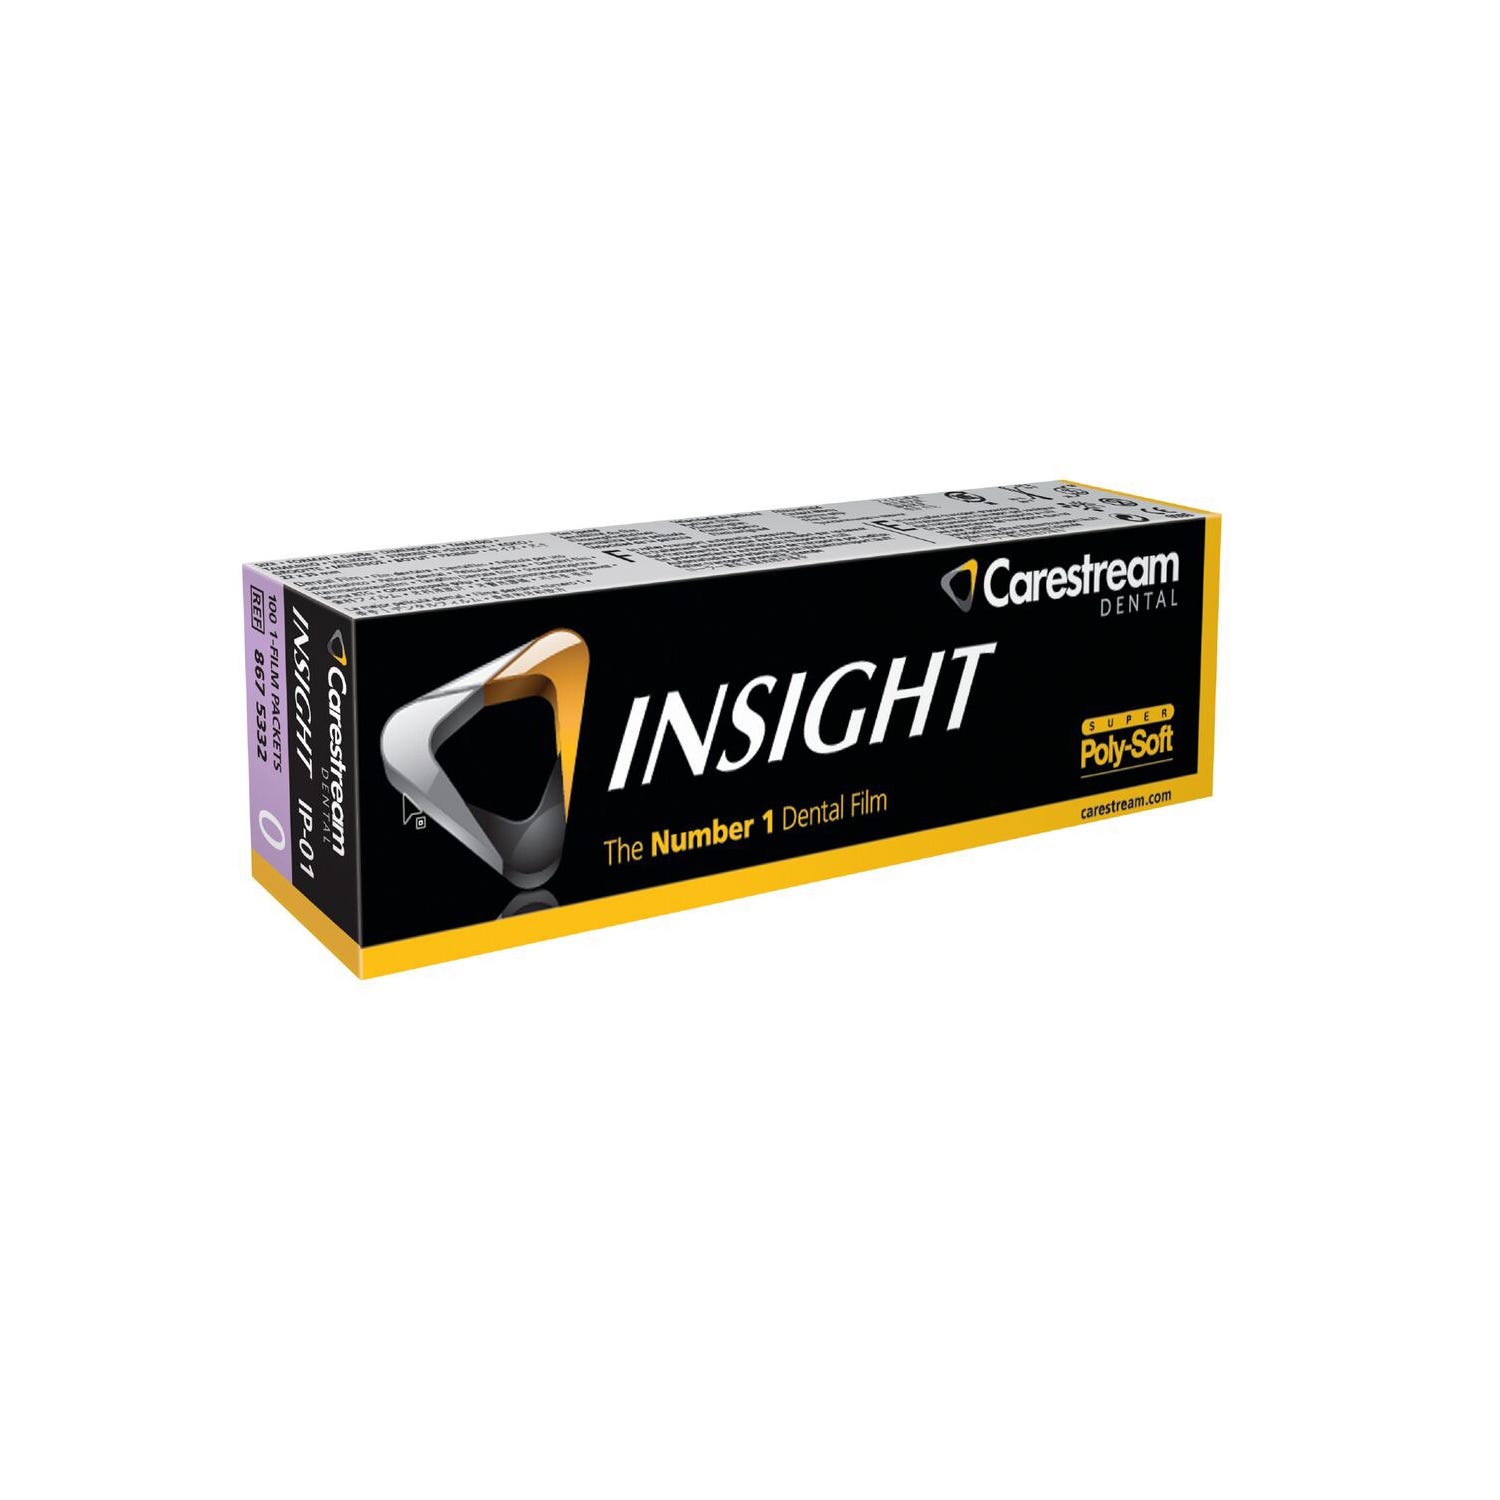 INSIGHT™ Dental Film, Size 0, IP-01, Super Poly-Soft™ Packets - 100/Box